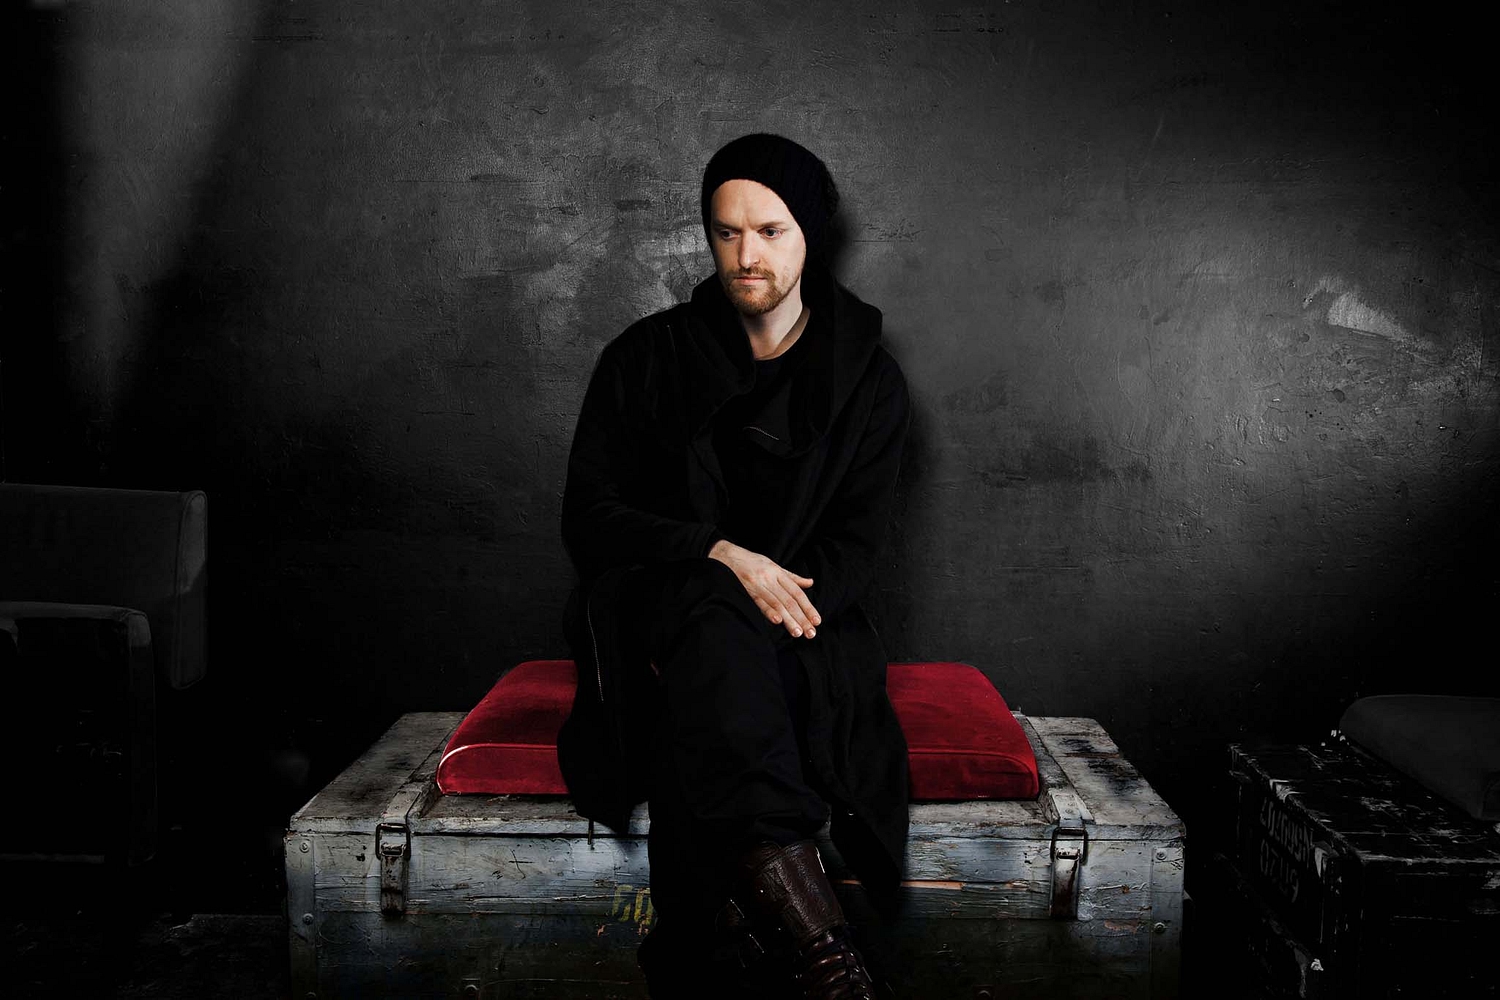 SOHN’s new album ‘Rennen’ is out in January!